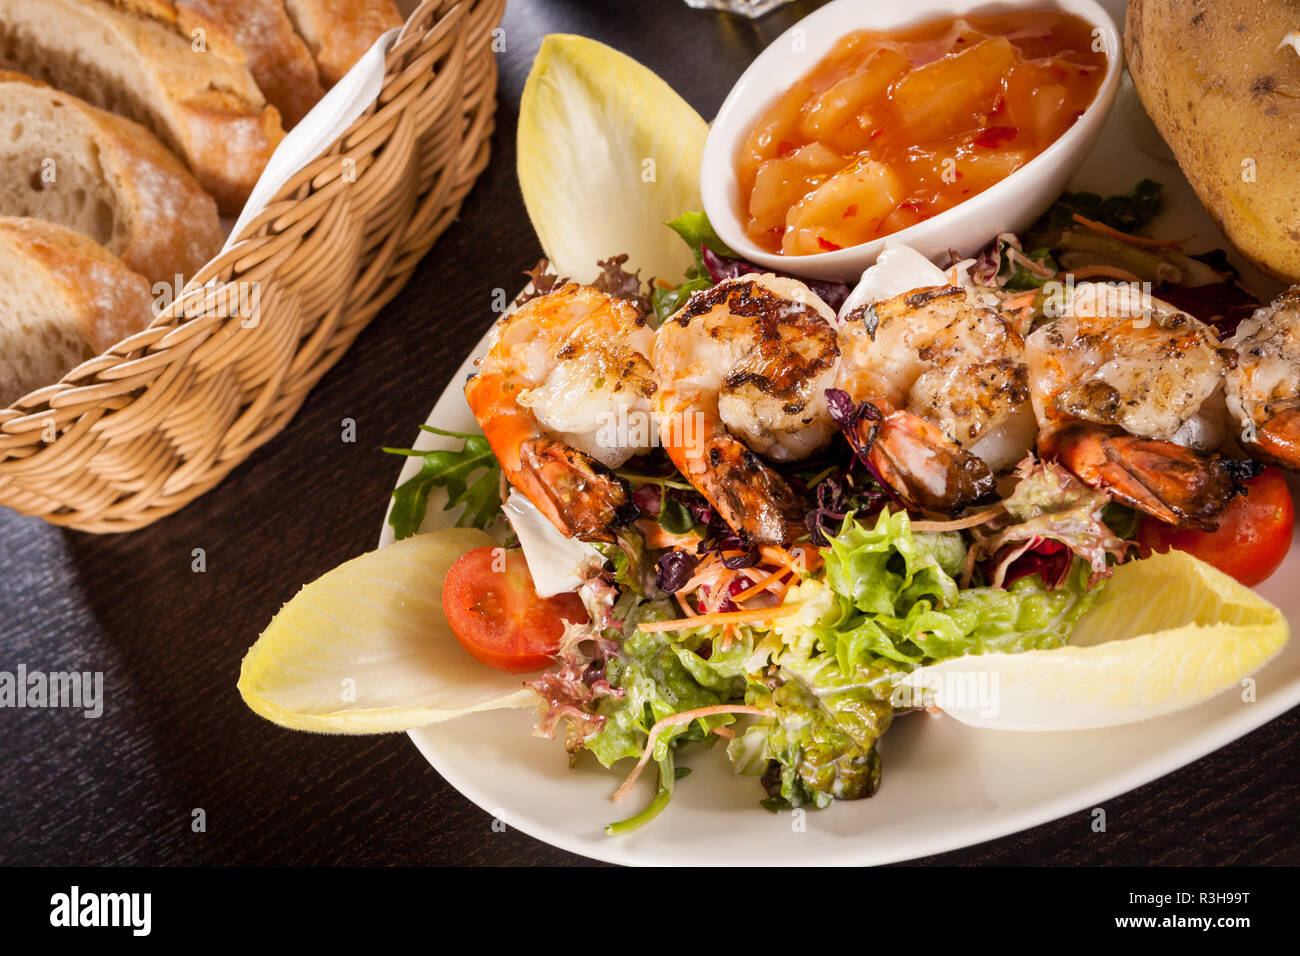 fried prawns on skewers with dipping sauce on mixed salad and baked potato Stock Photo